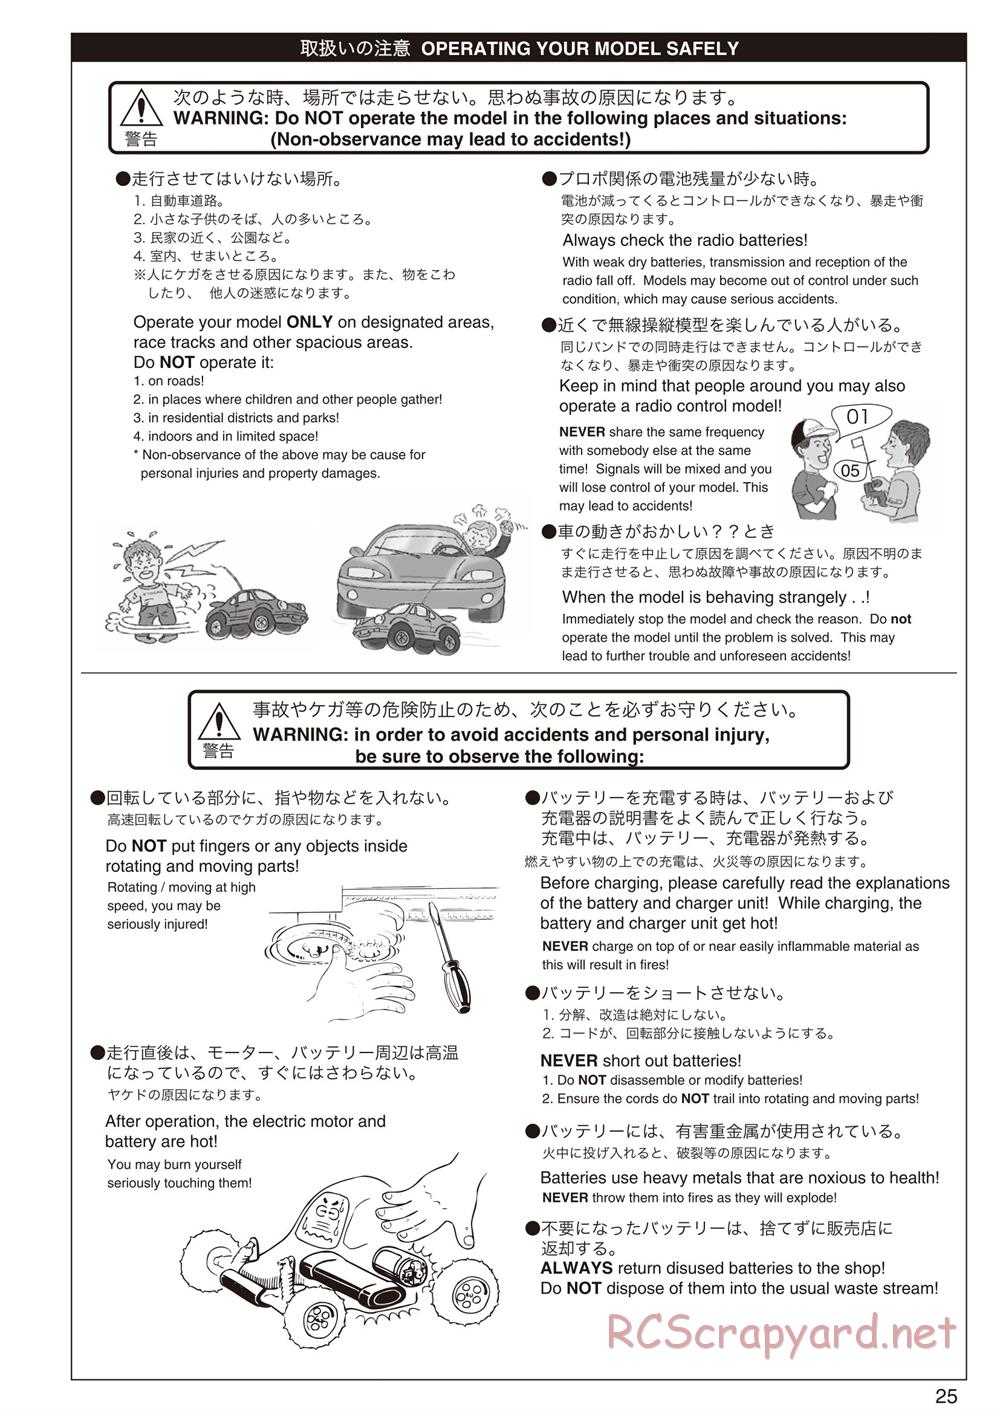 Kyosho - Ultima RB5 SP - Manual - Page 25